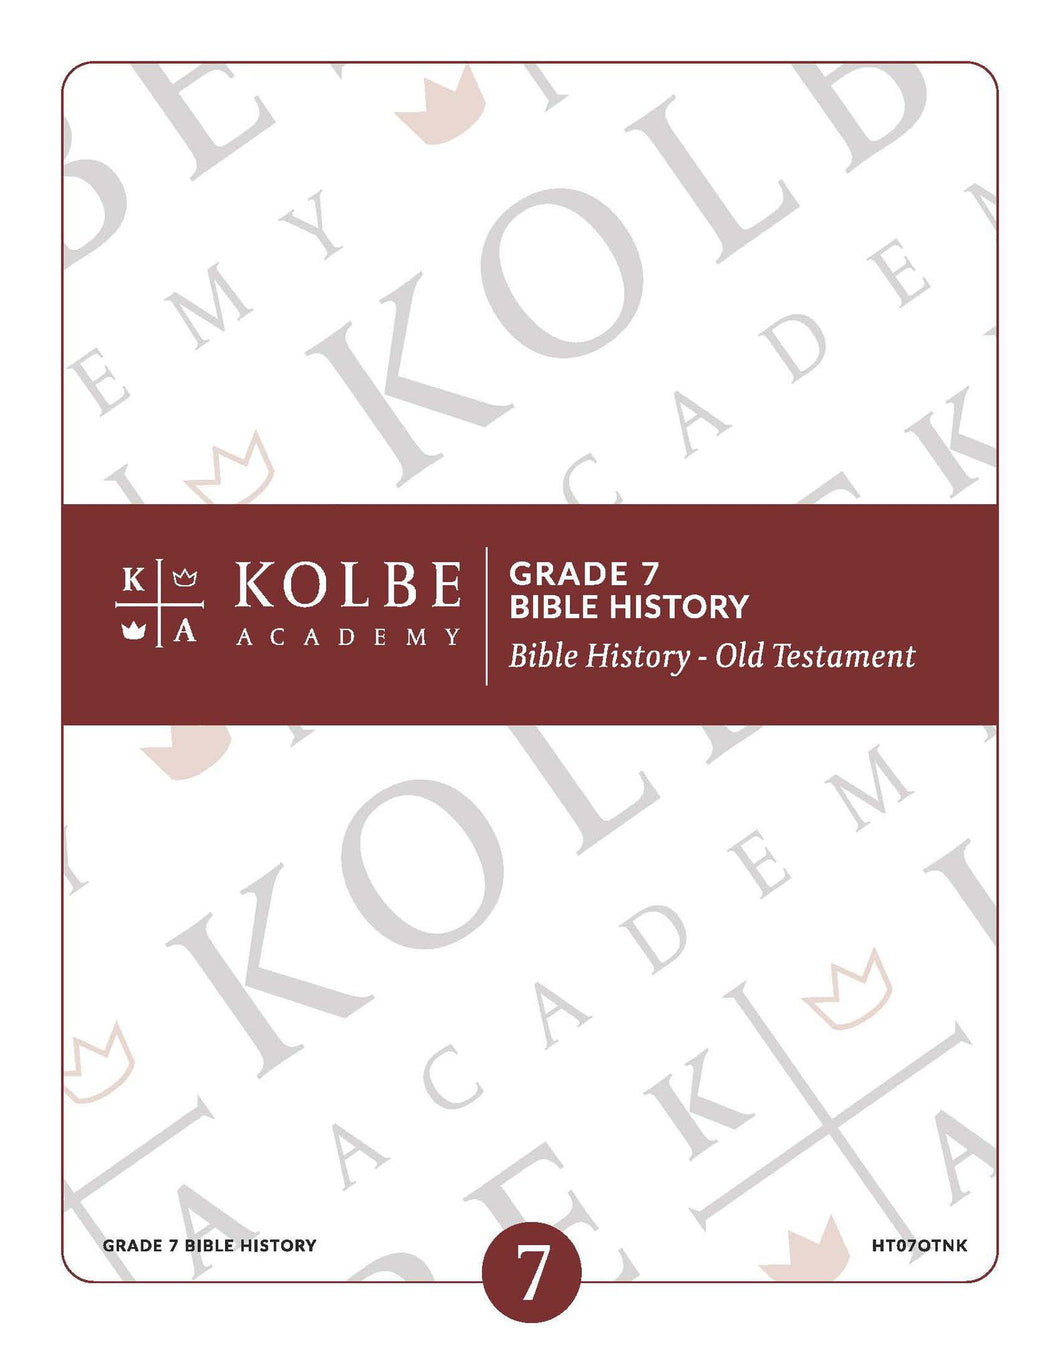 Course Plan & Tests - Bible History 7